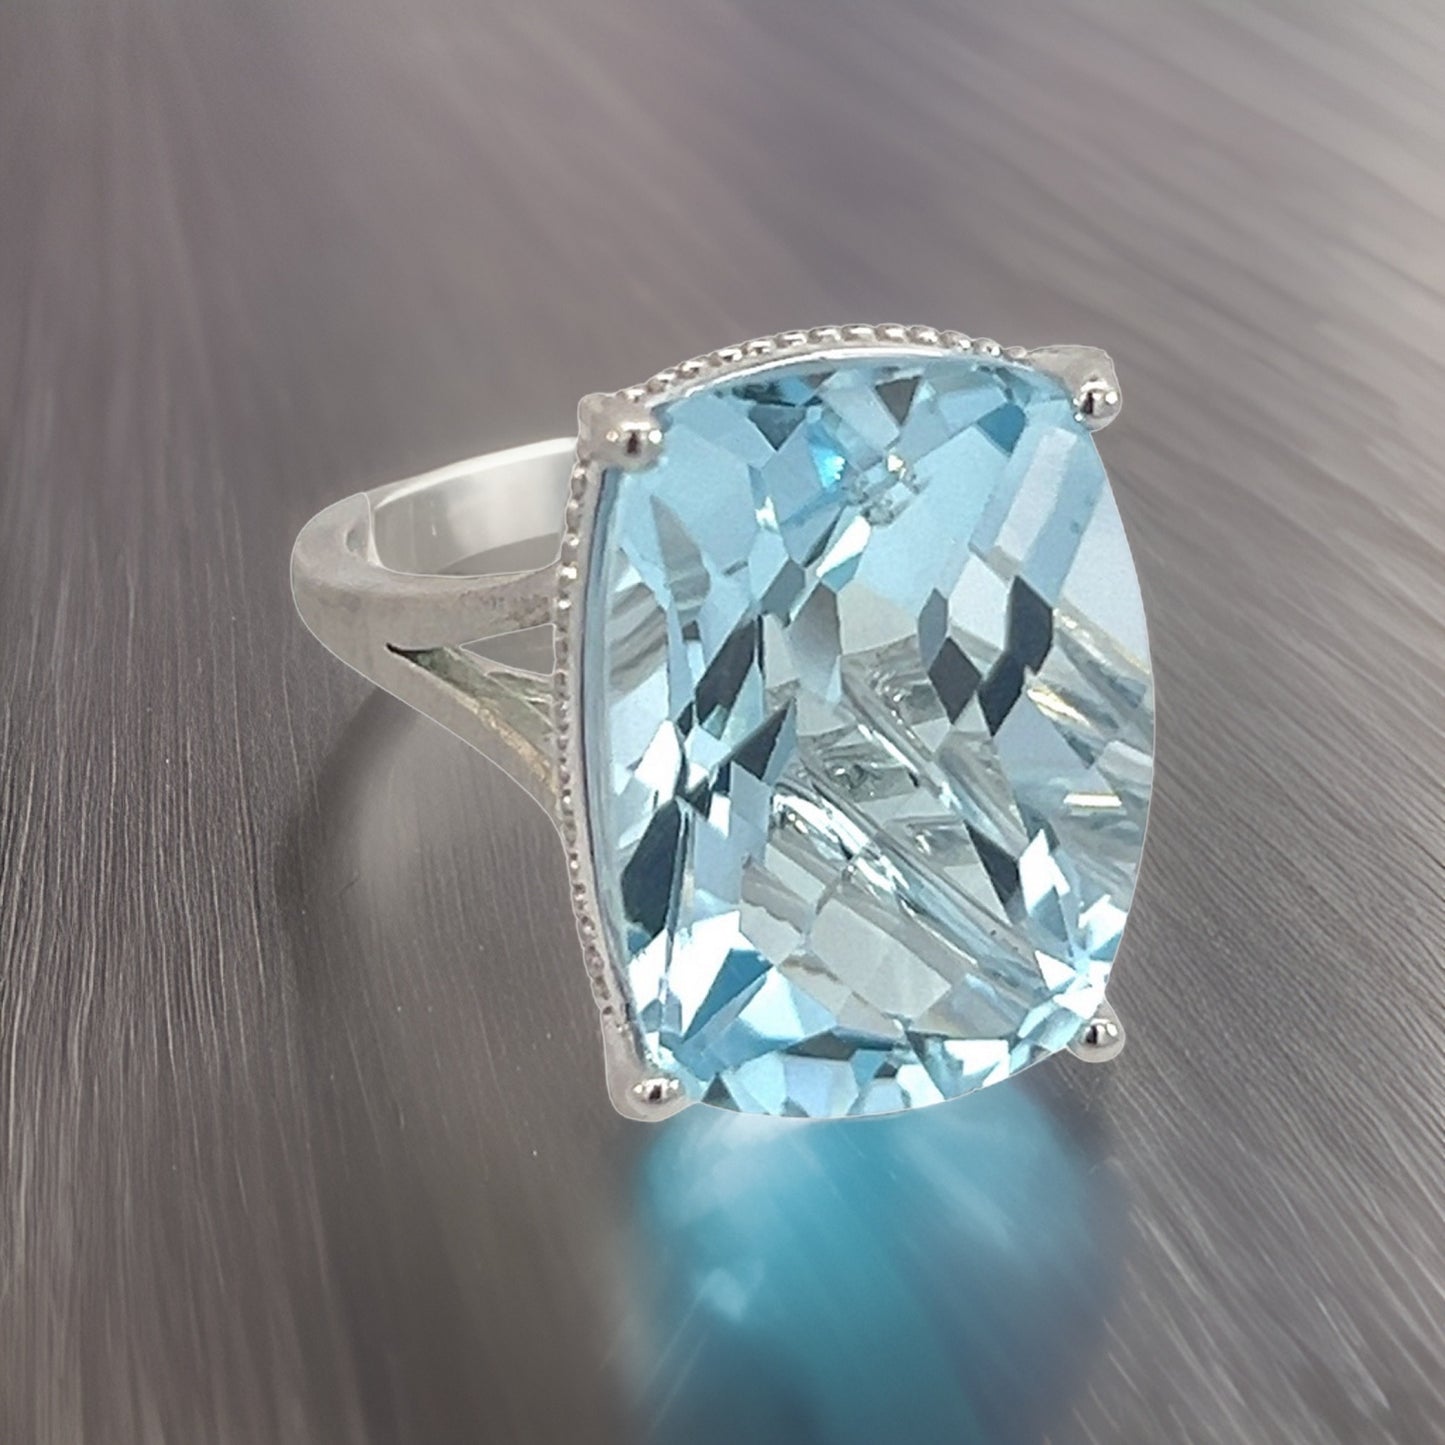 Natural Solitaire Blue Topaz Ring 6.5 14k W Gold 19.58 Cts Certified $3,950 310546